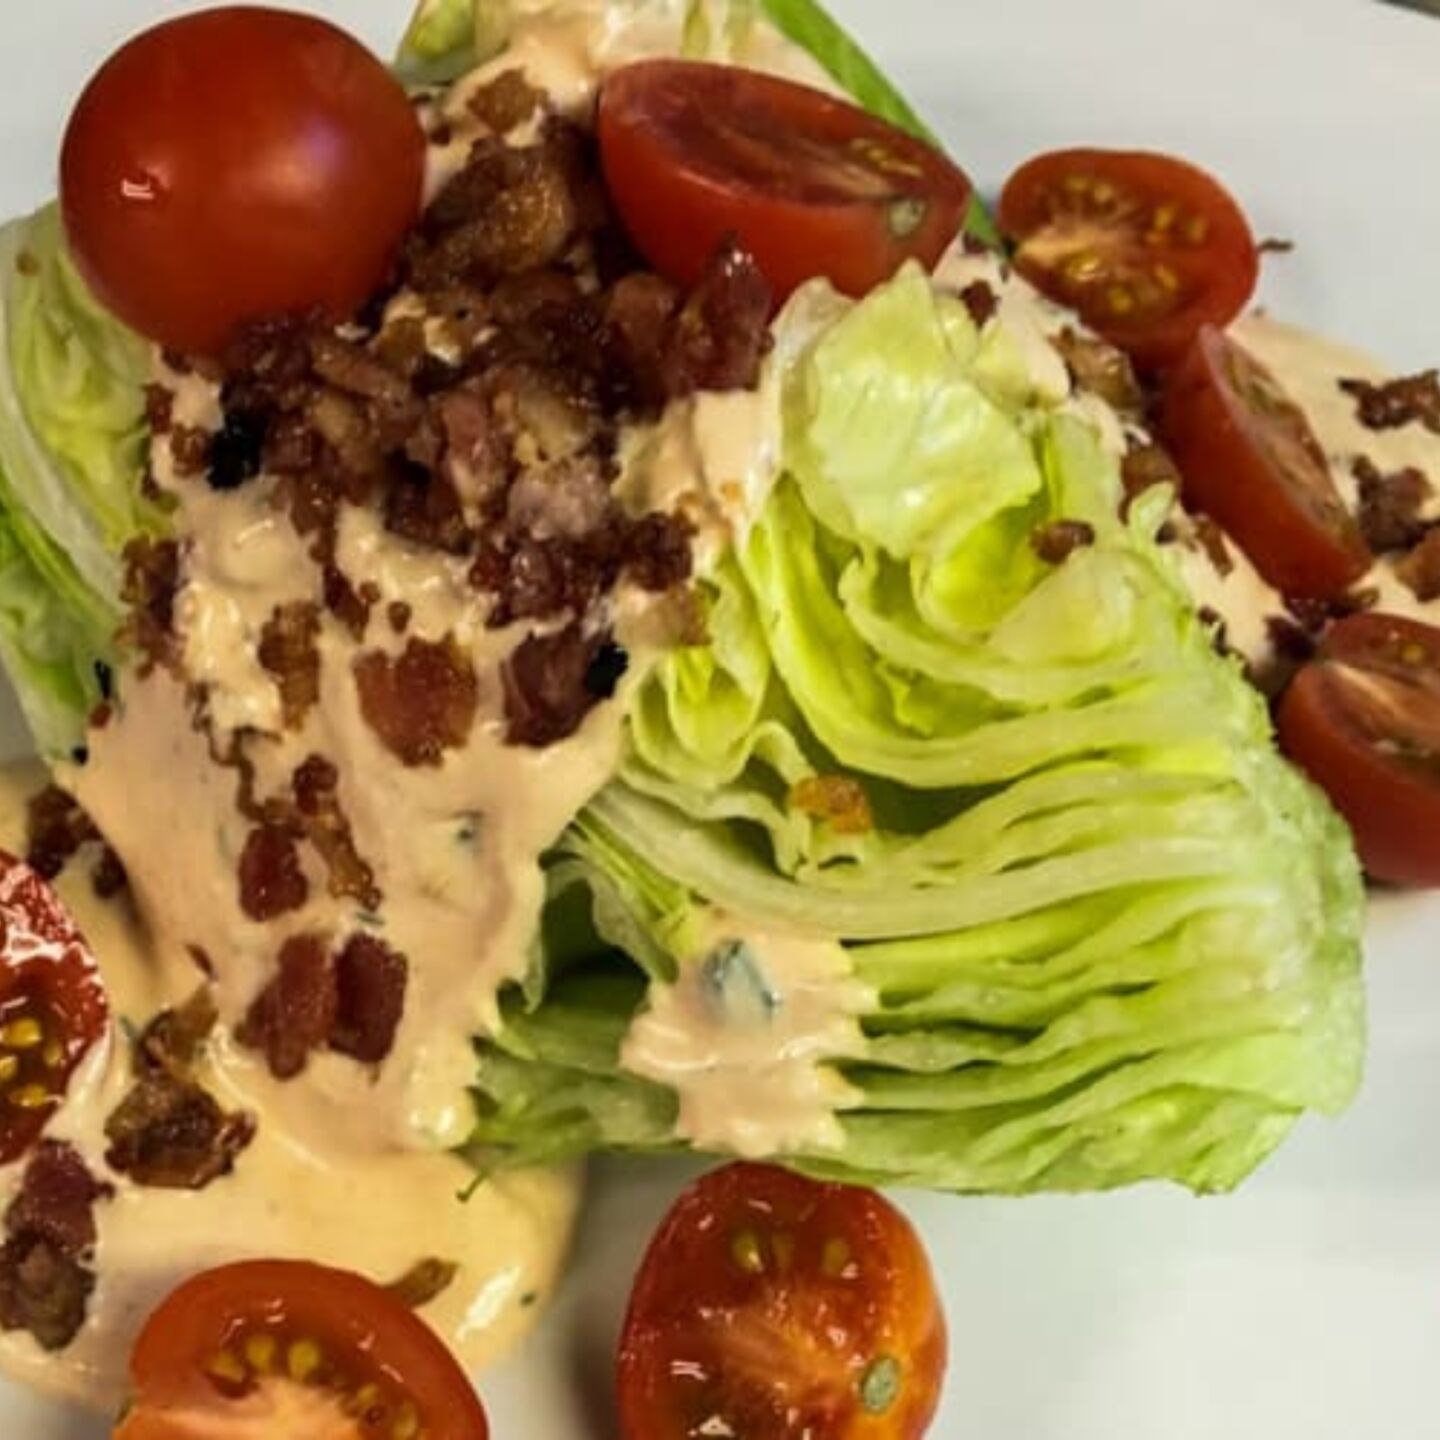 6. Blt wedge salad with chipotle ranch dressing